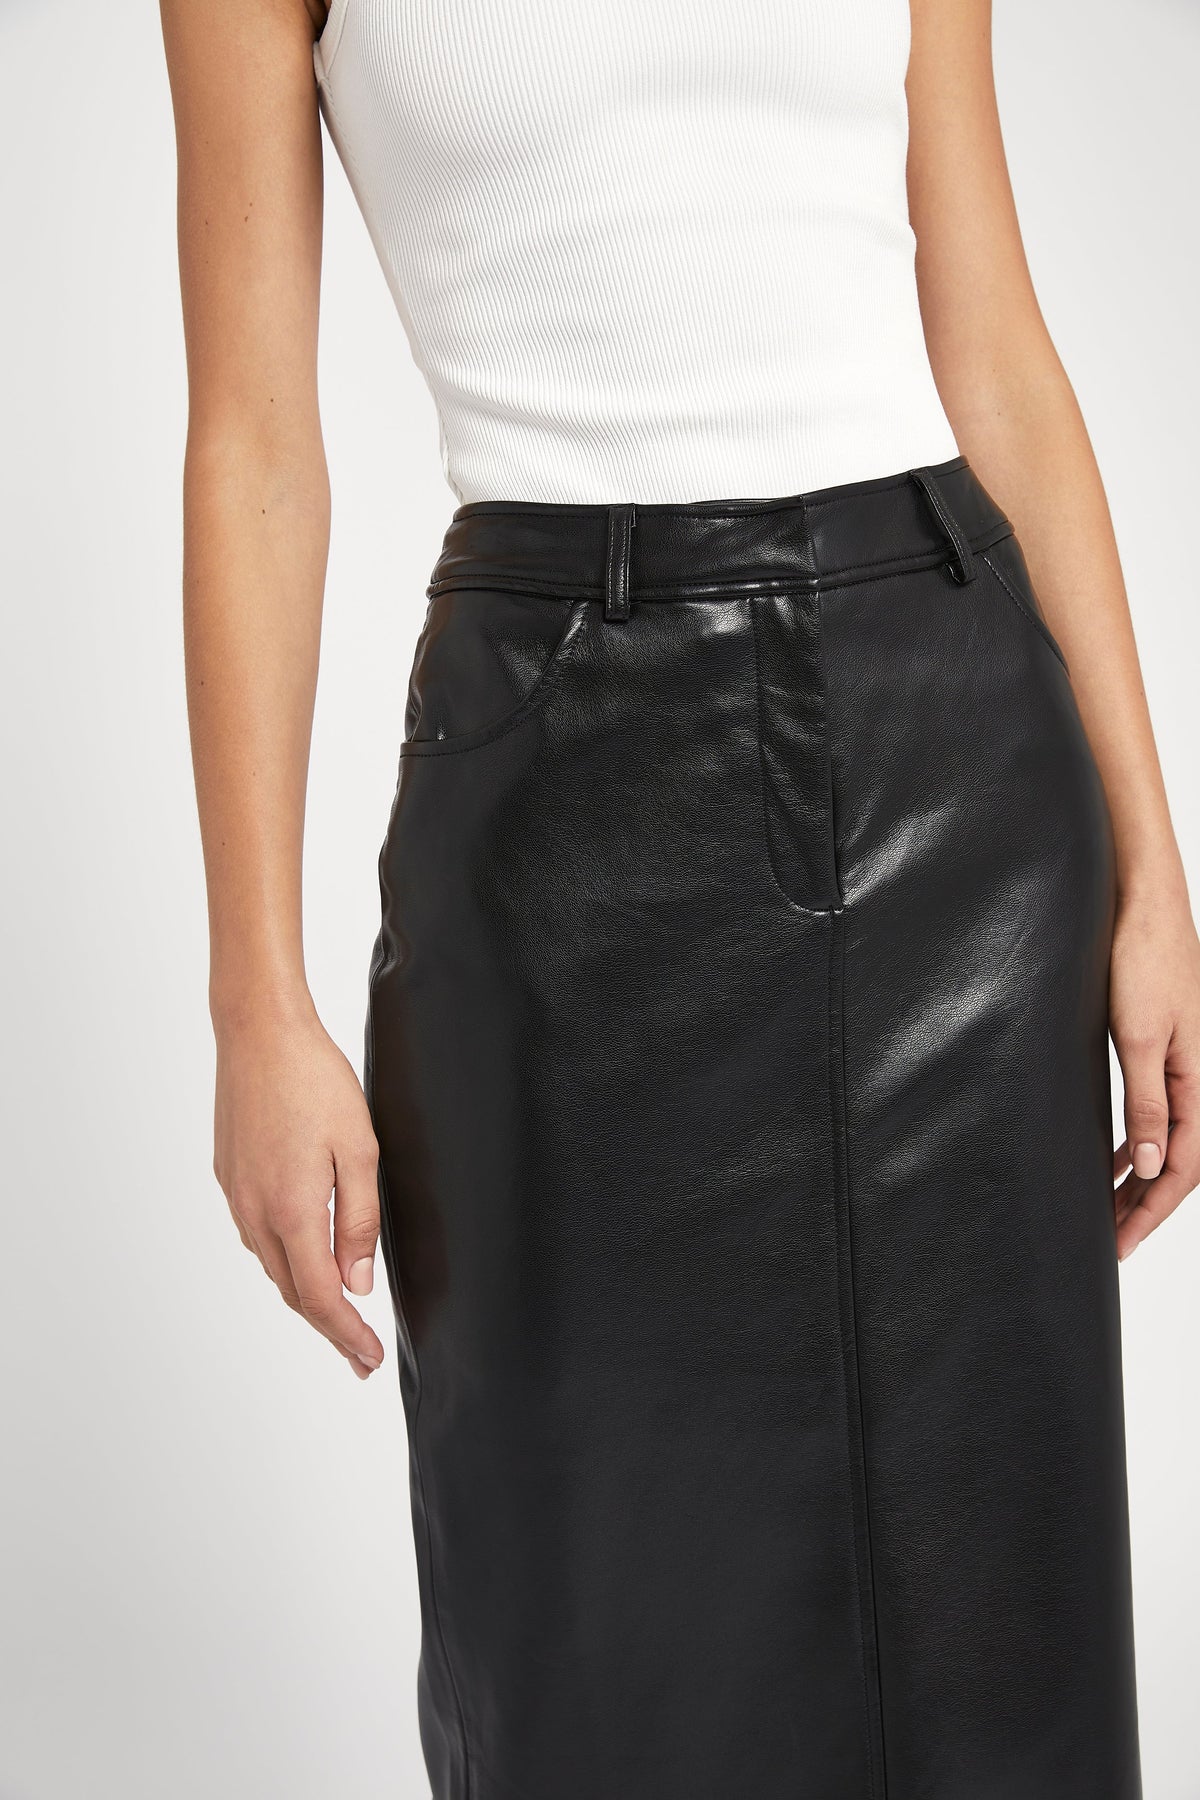 Leather Tailored Maxi Skirt - Black